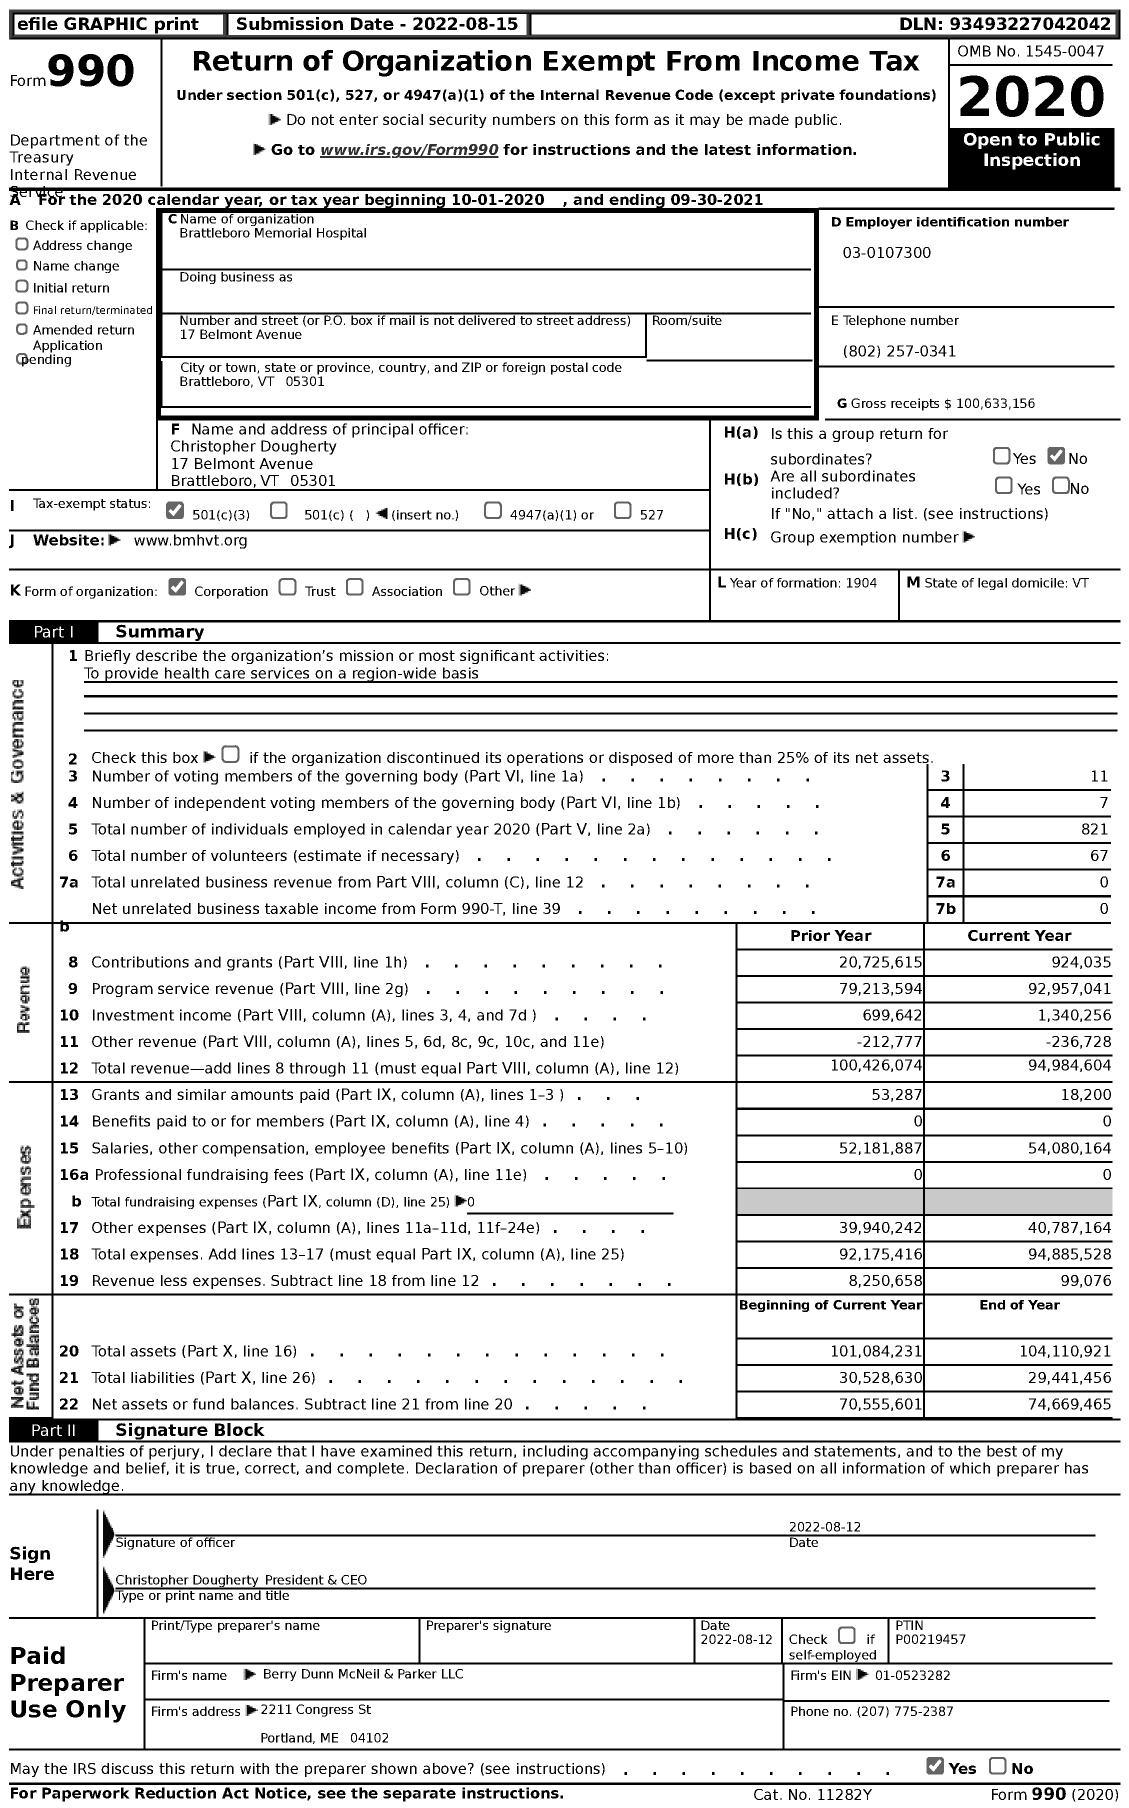 Image of first page of 2020 Form 990 for Brattleboro Memorial Hospital (BMH)